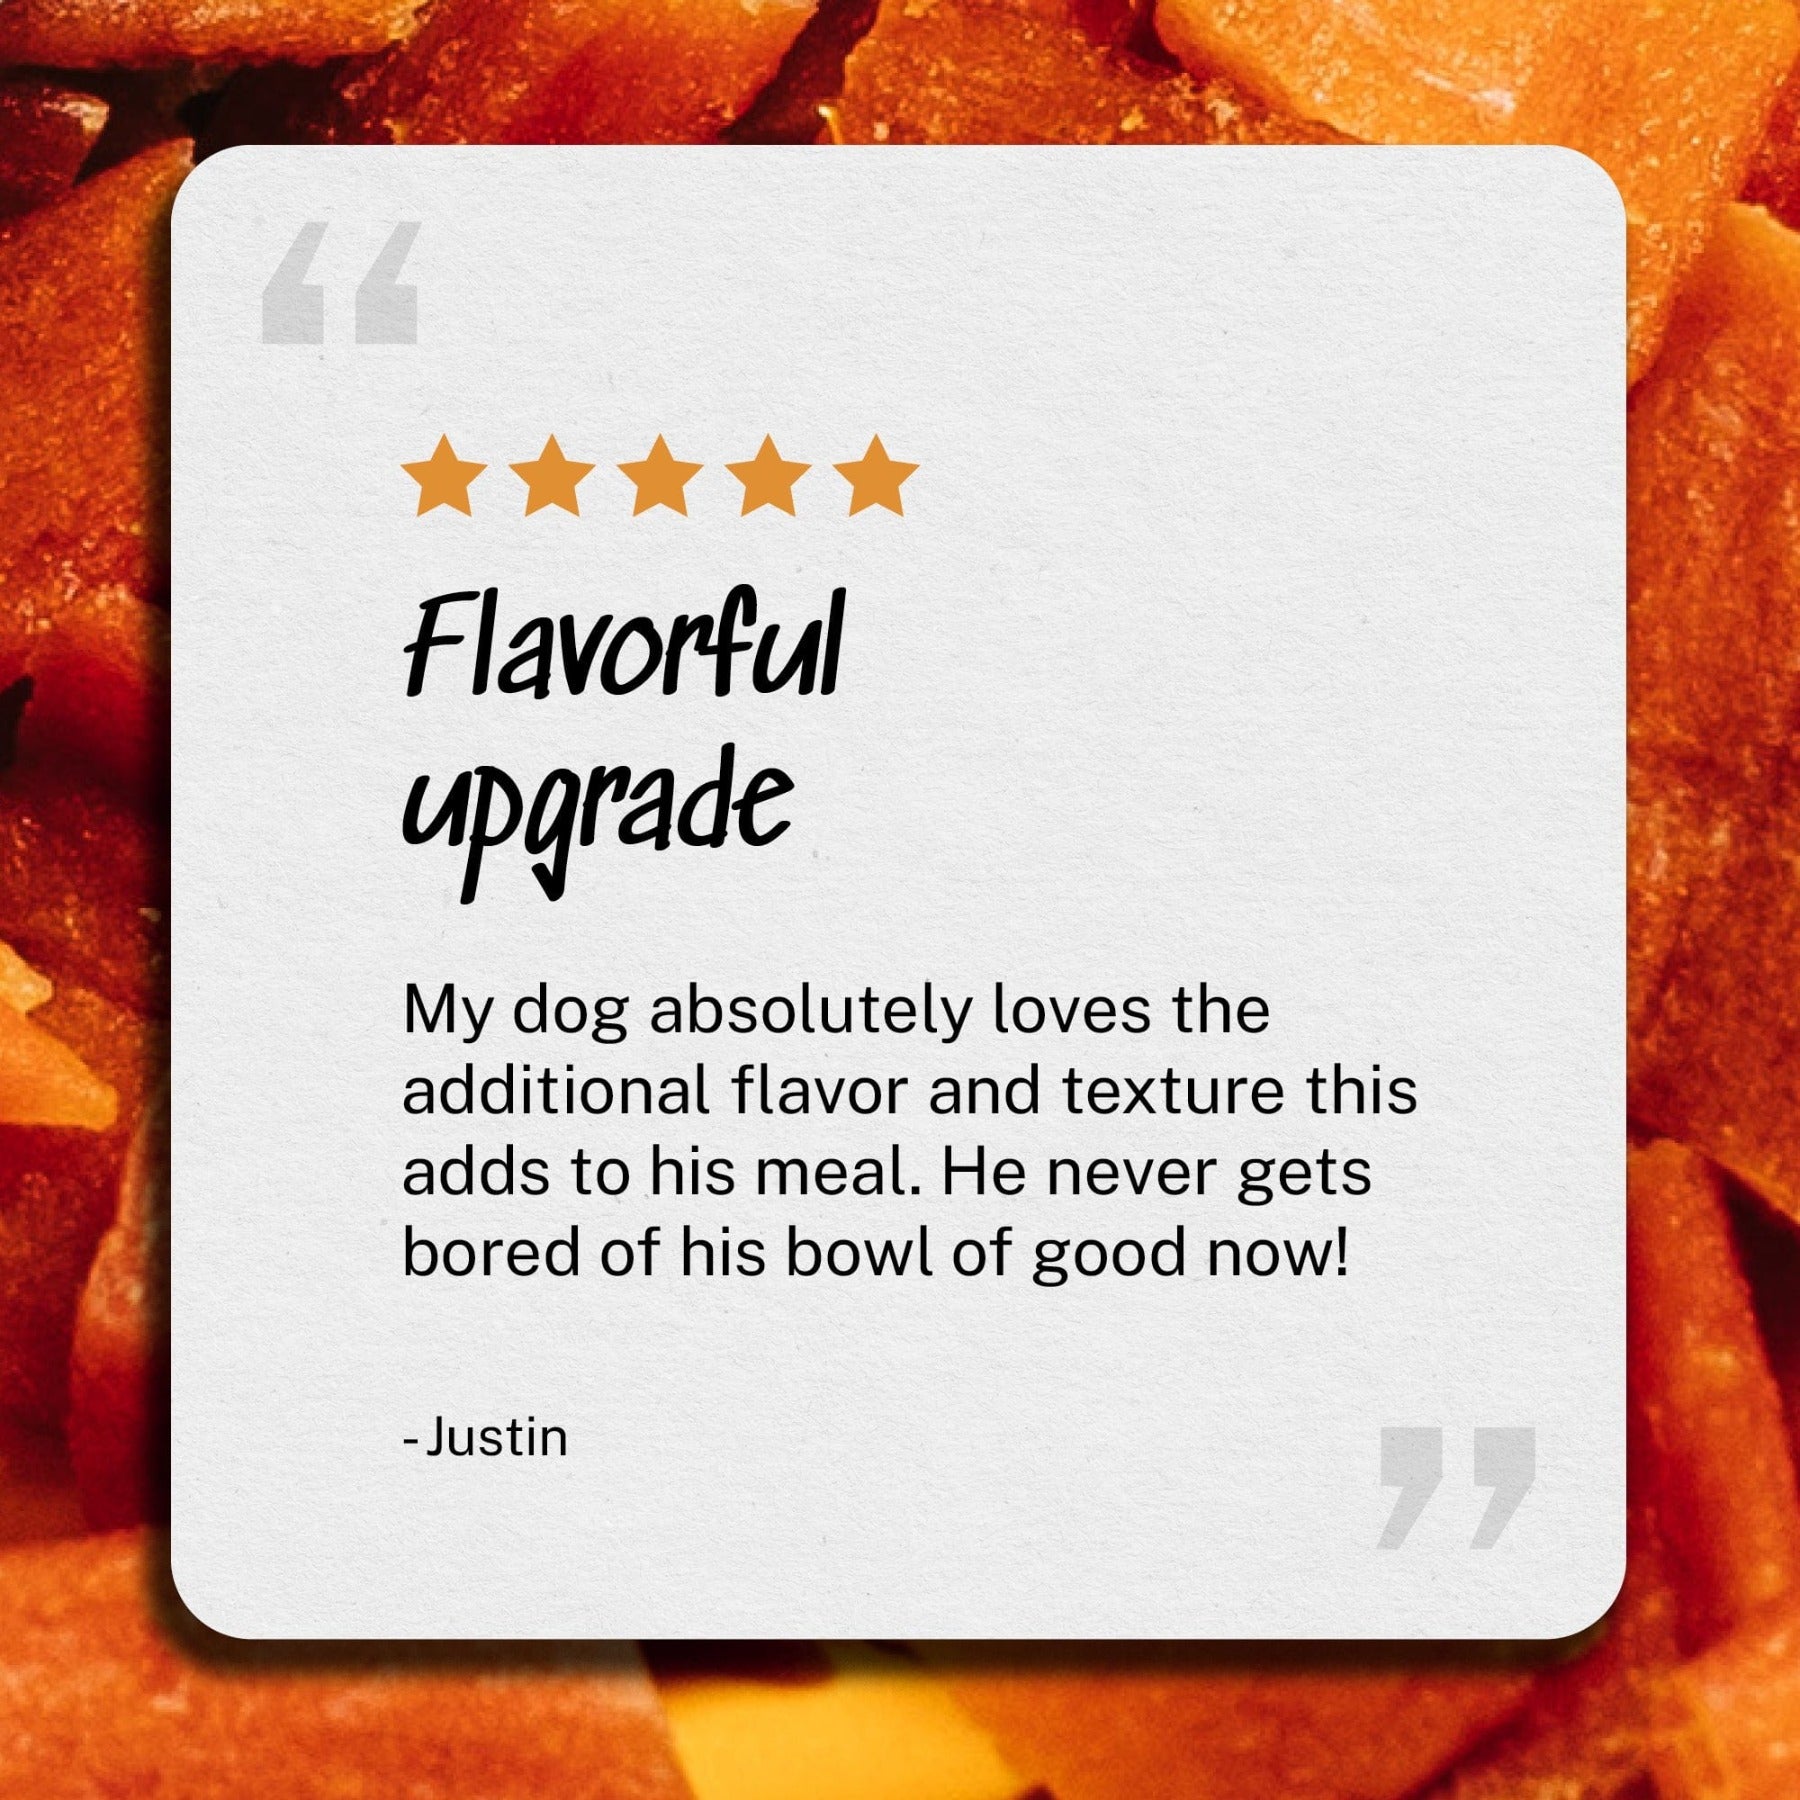 Review: Flavorful upgrade - My dog absolutely loves the additional flavor and texture this adds to his meal. He never gets bored of his bowl of good now! - Justin